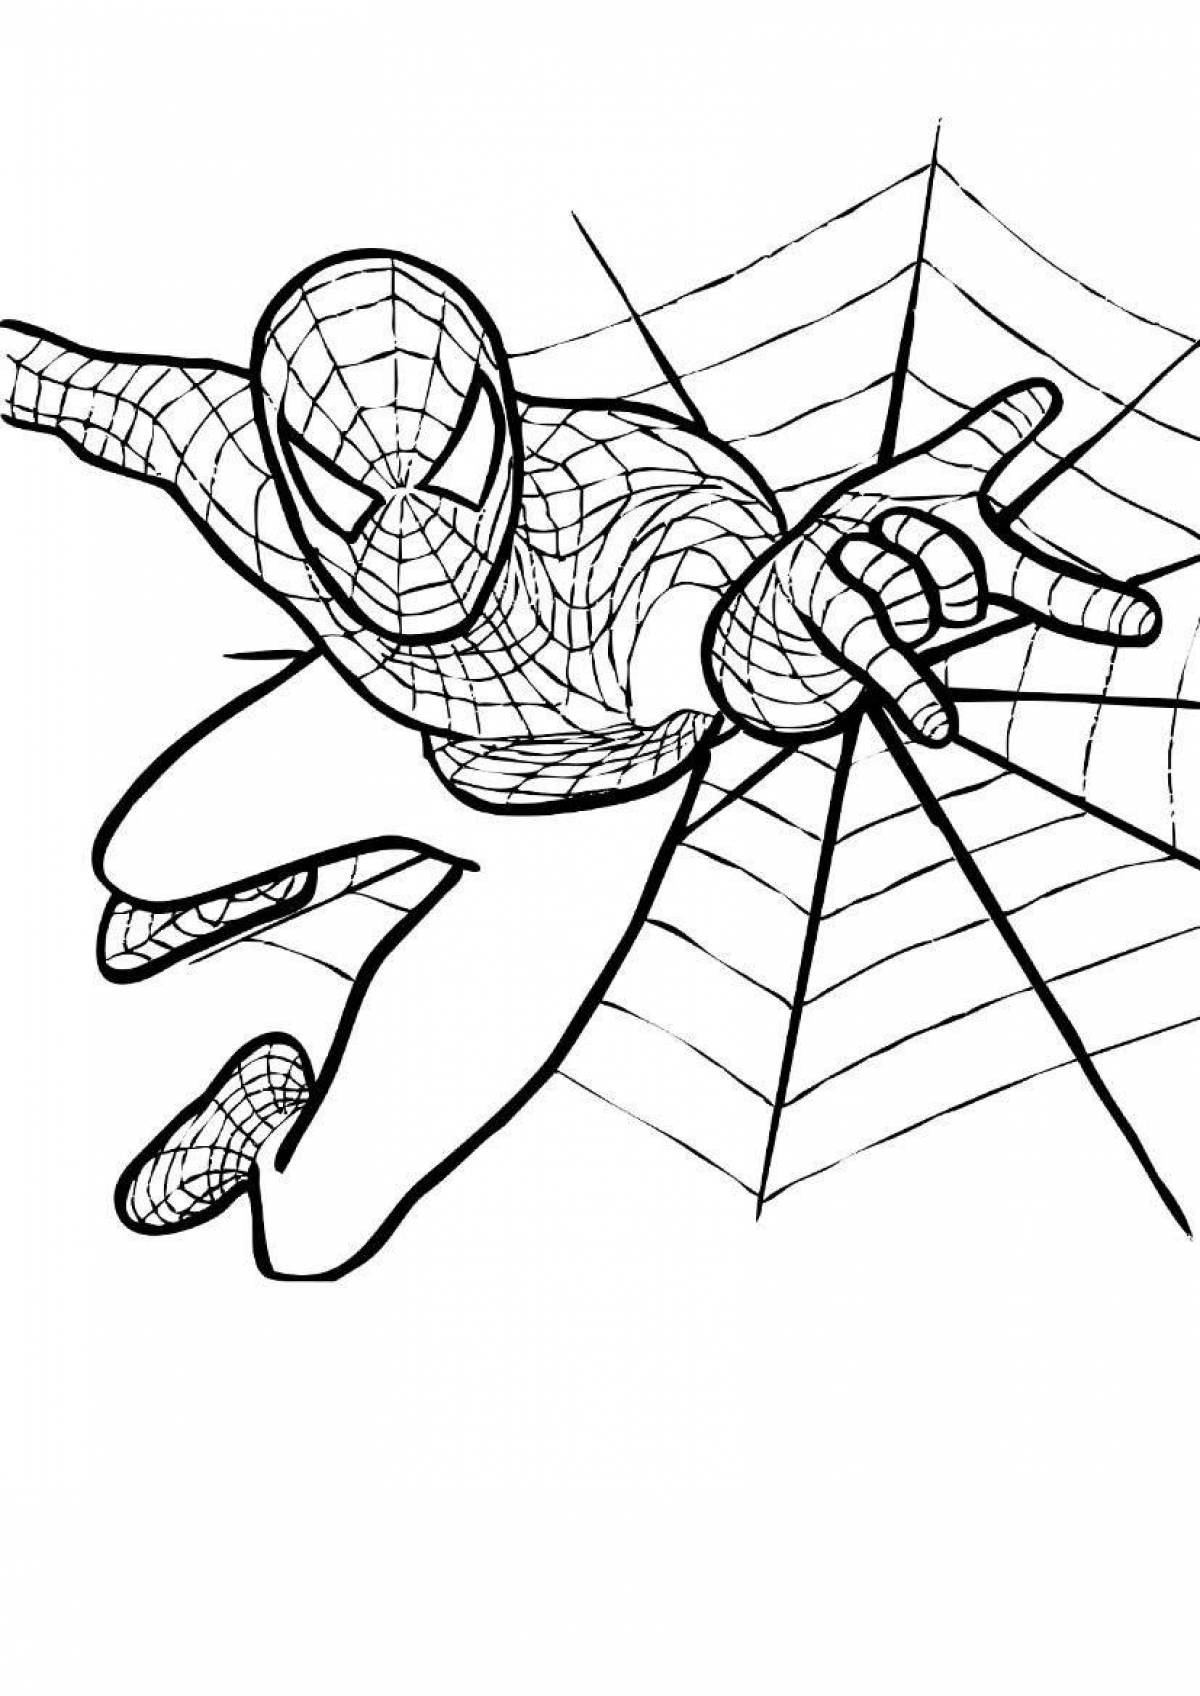 Fabulous Spiderman Coloring Page for Boys